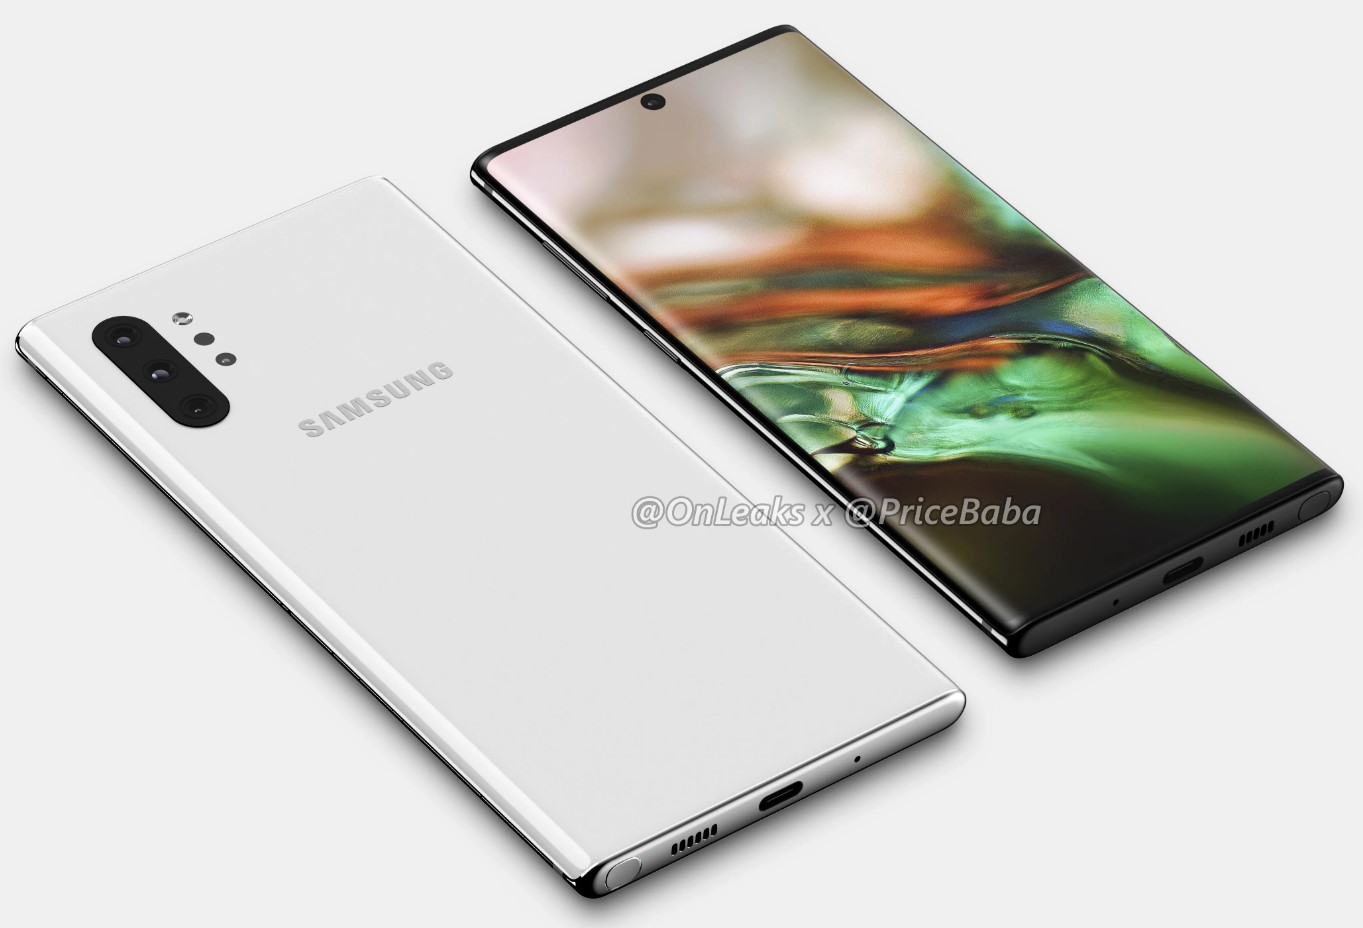 Samsung Galaxy Note 10 Series release expected on August 10